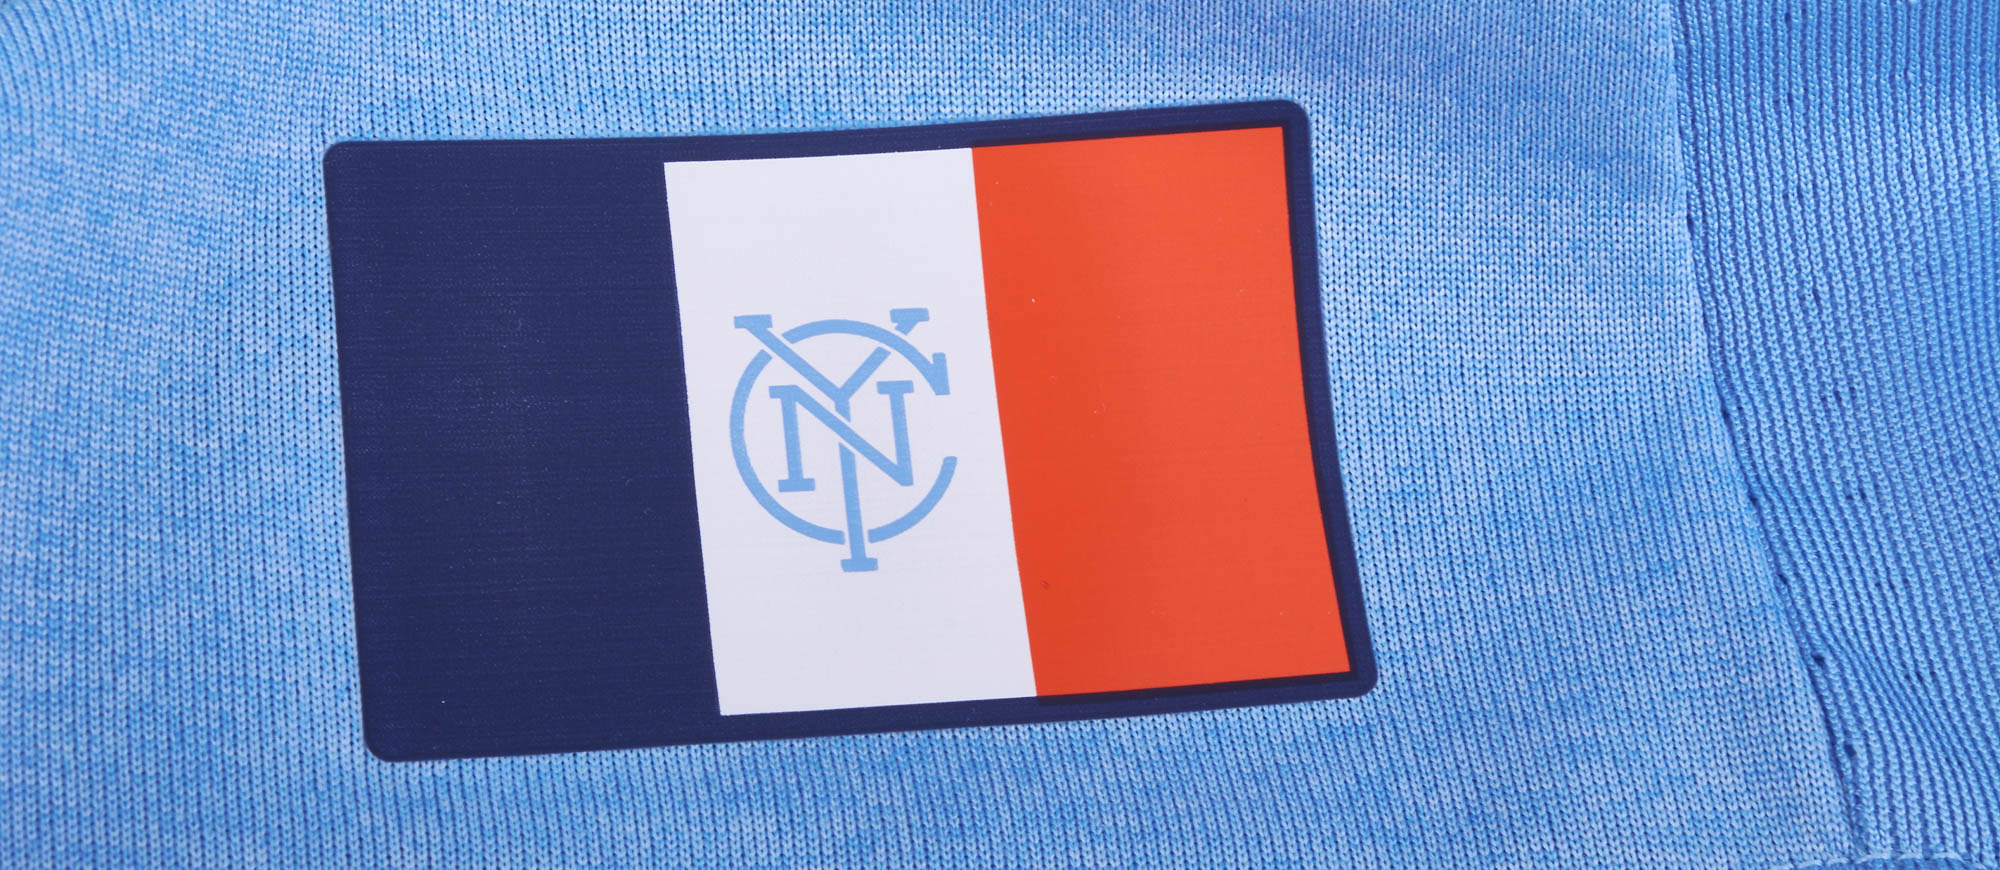 adidas NYCFC Authentic Home Jersey 2017-18